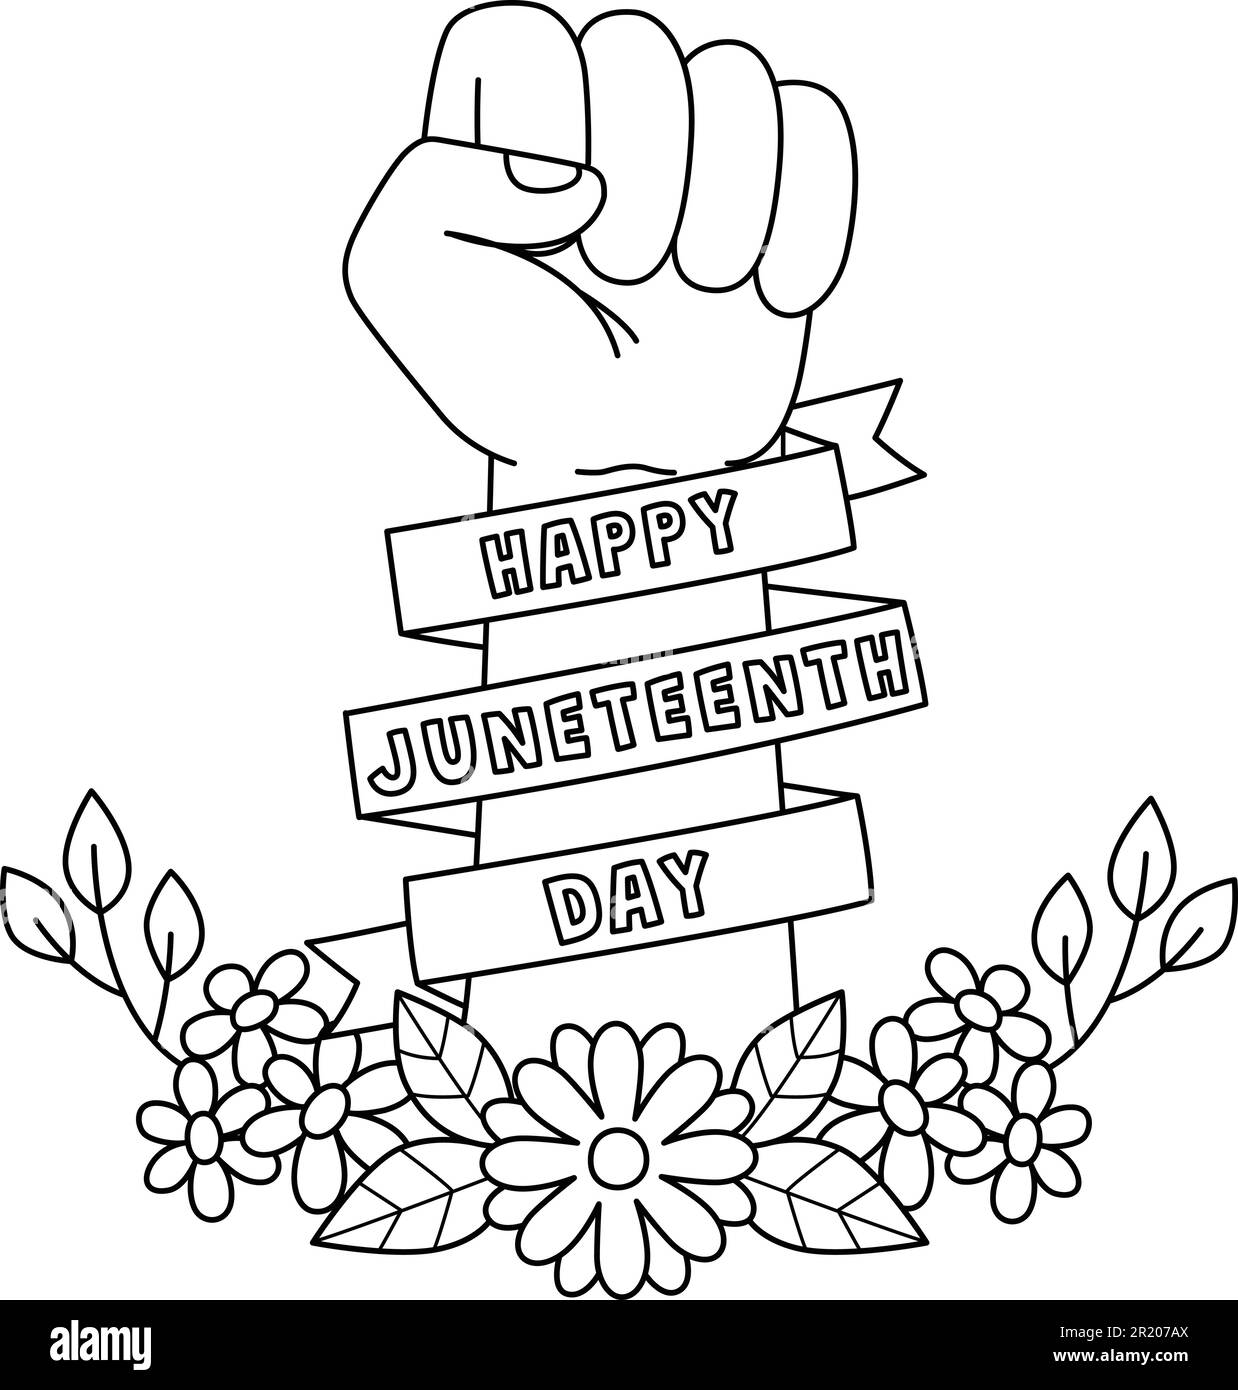 Happy juneteenth day isolated coloring page stock vector image art